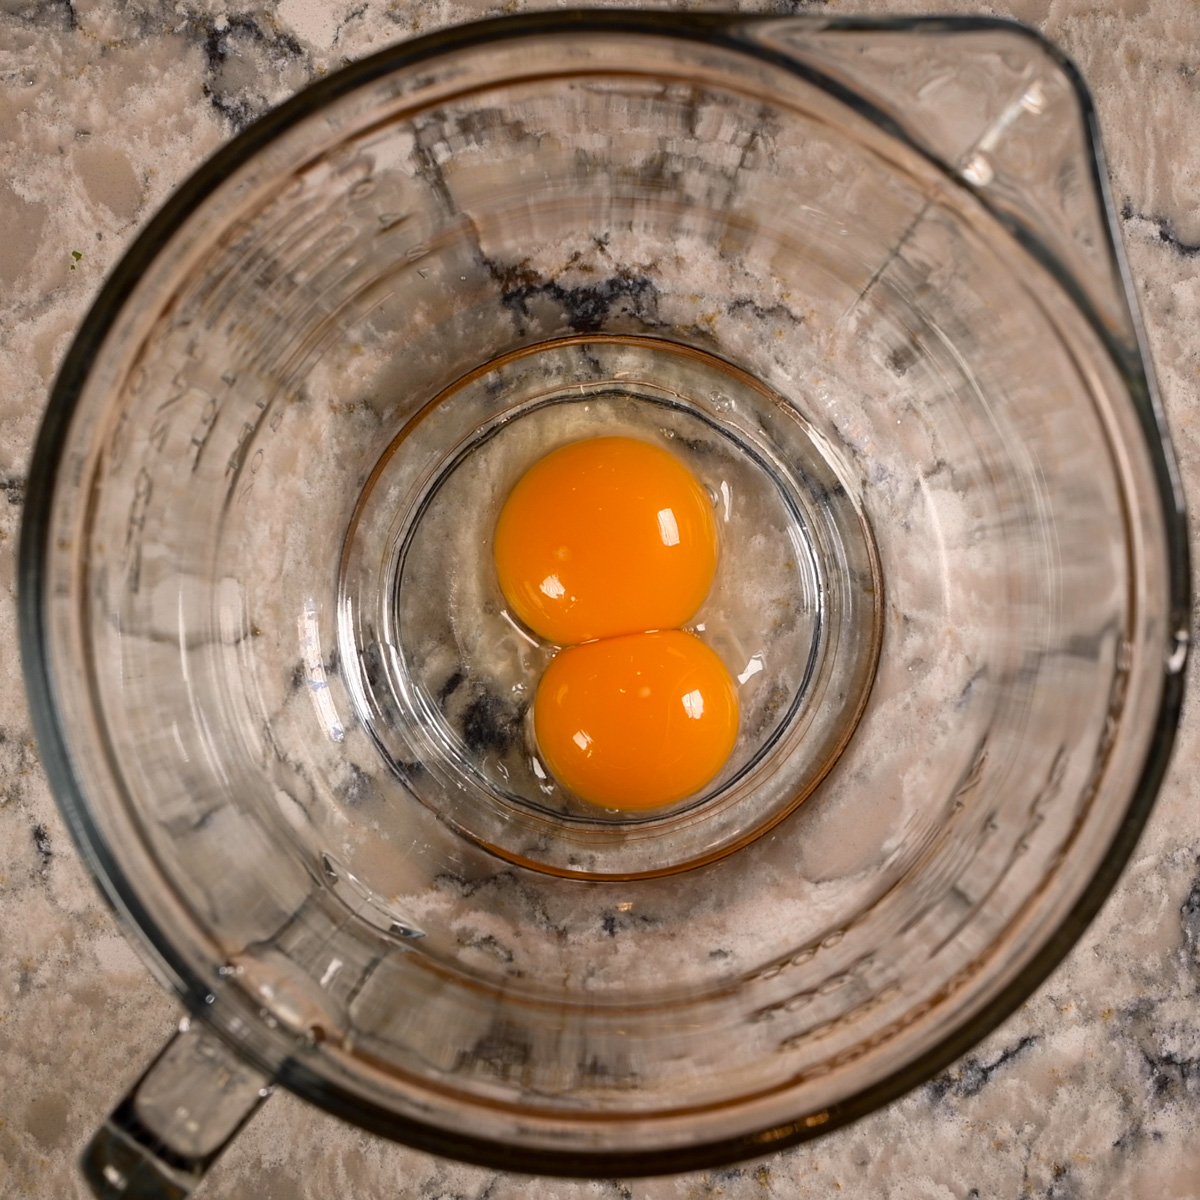 Separate eggs and gently beat egg yolks.